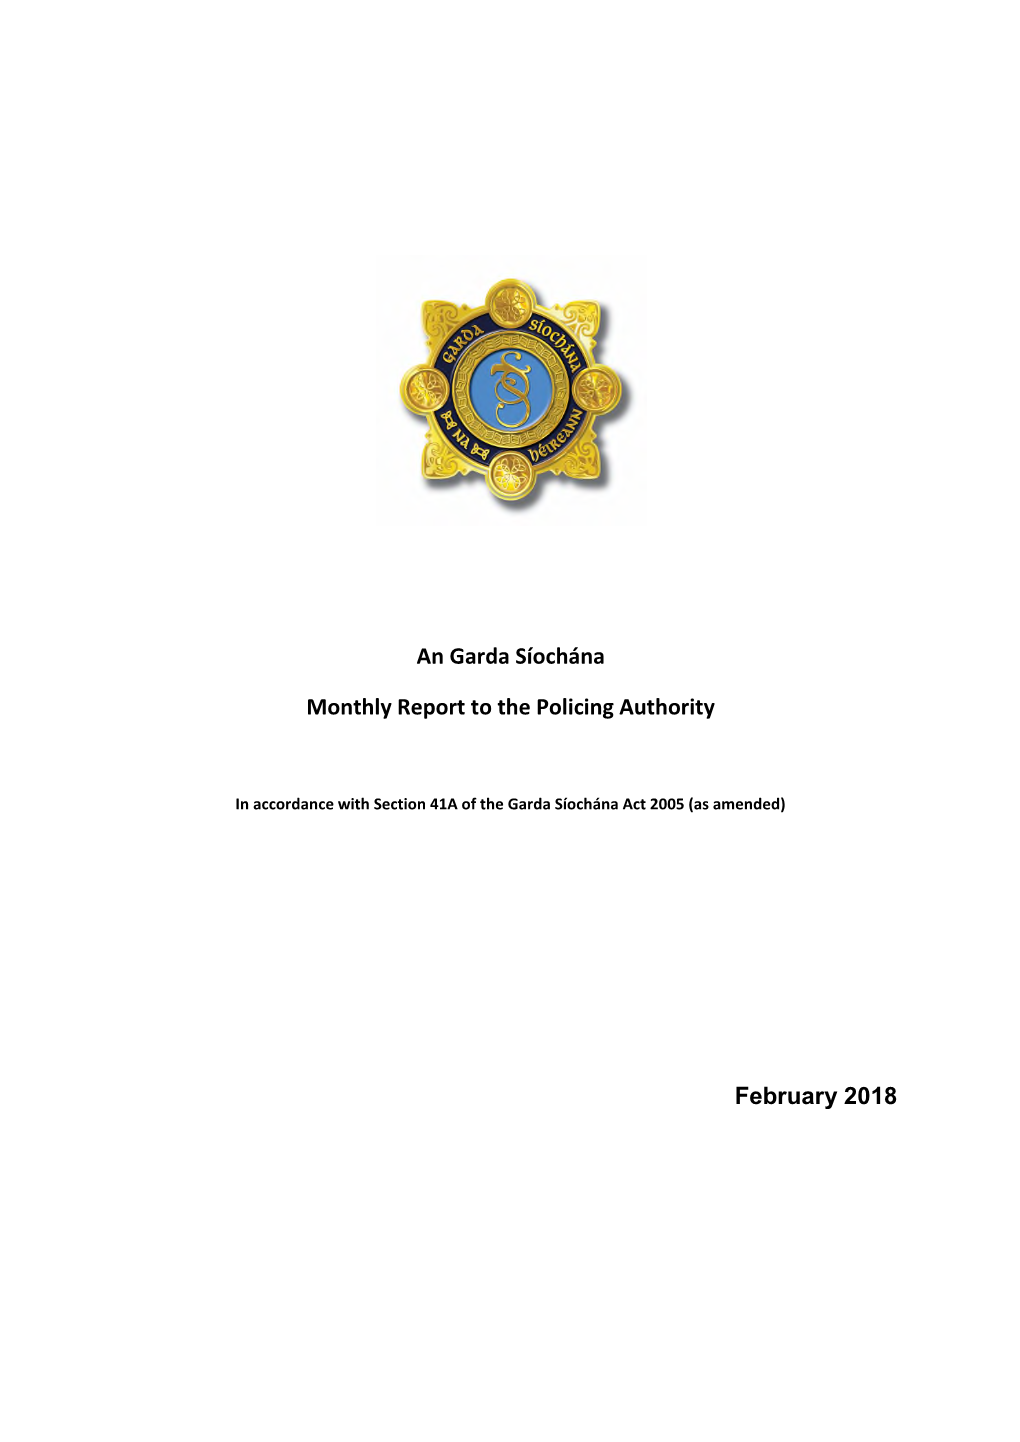 An Garda Síochána Monthly Report to the Policing Authority February 2018